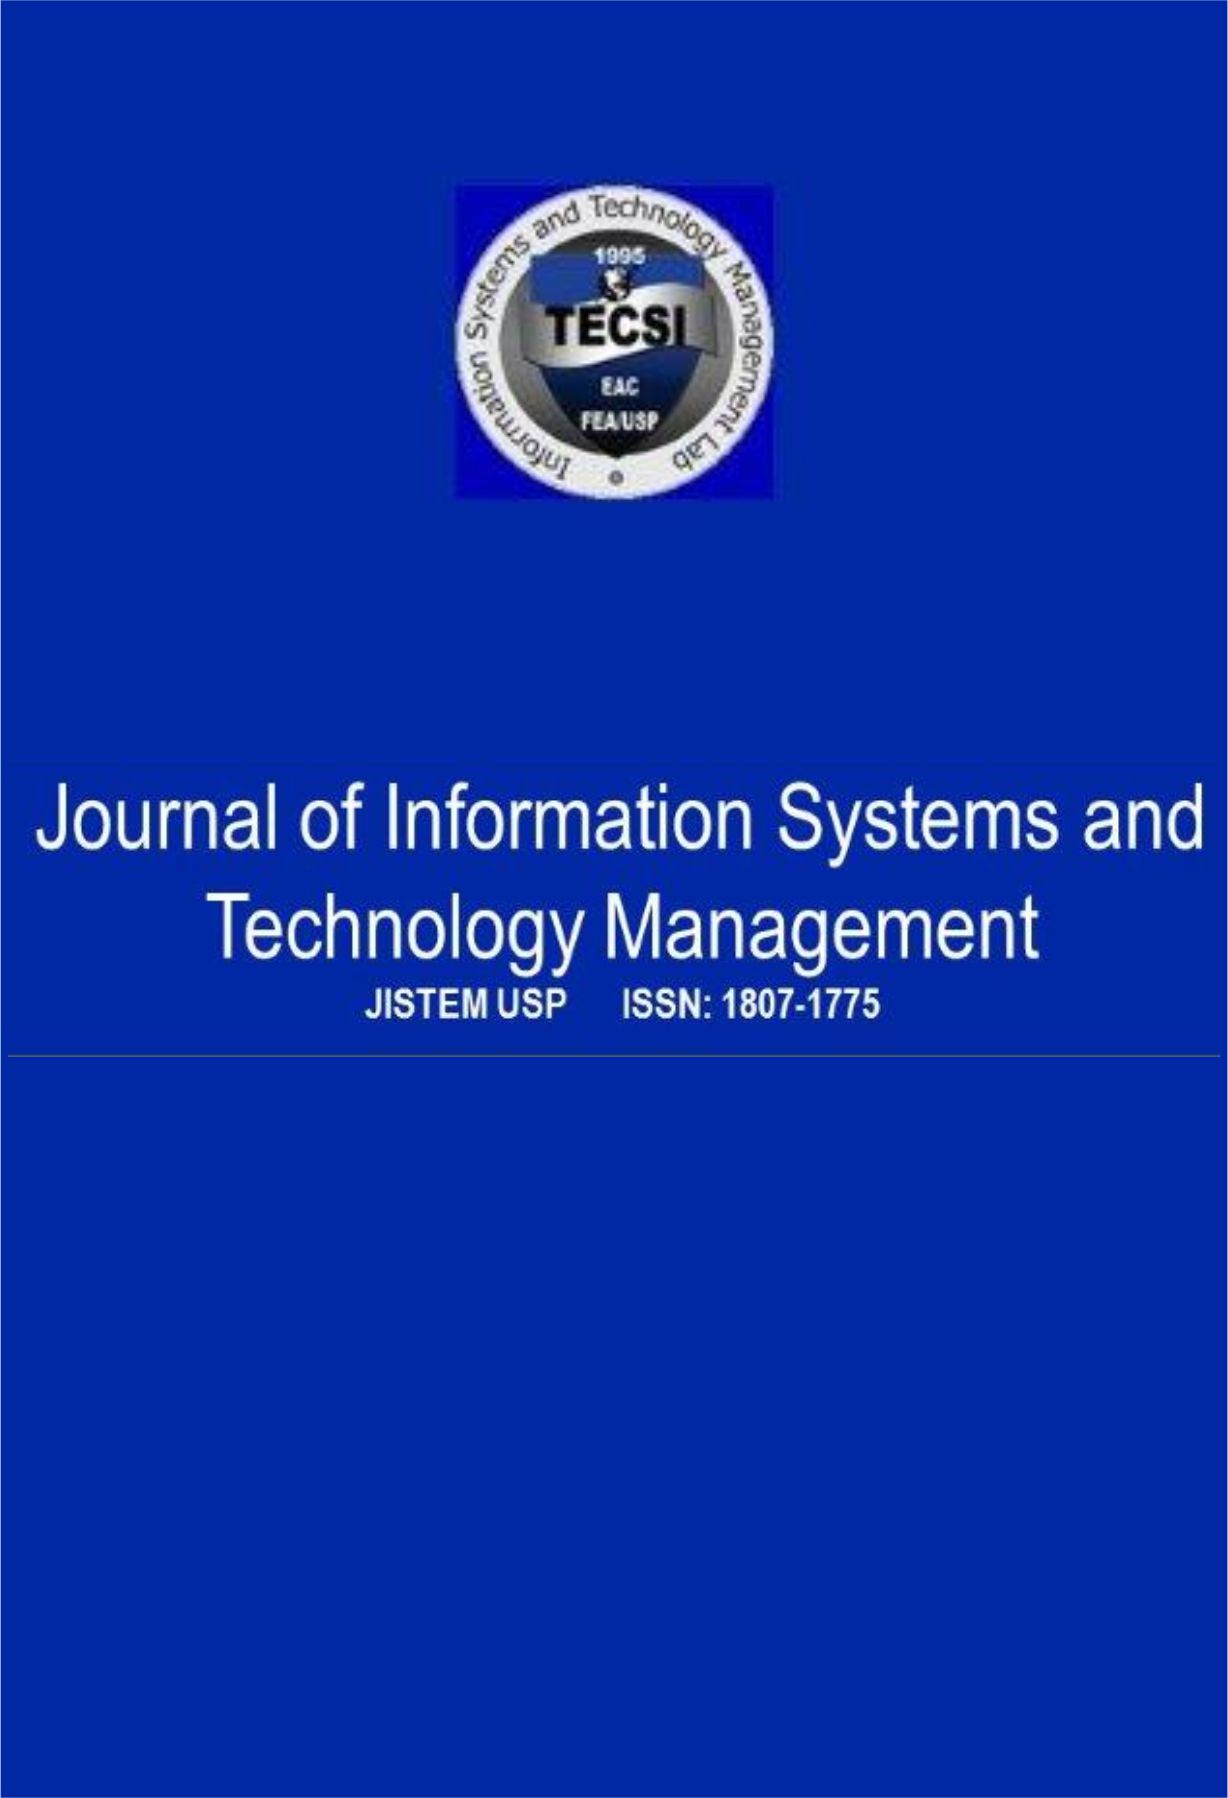 Capa: Journal of Information Systems and Technology Management